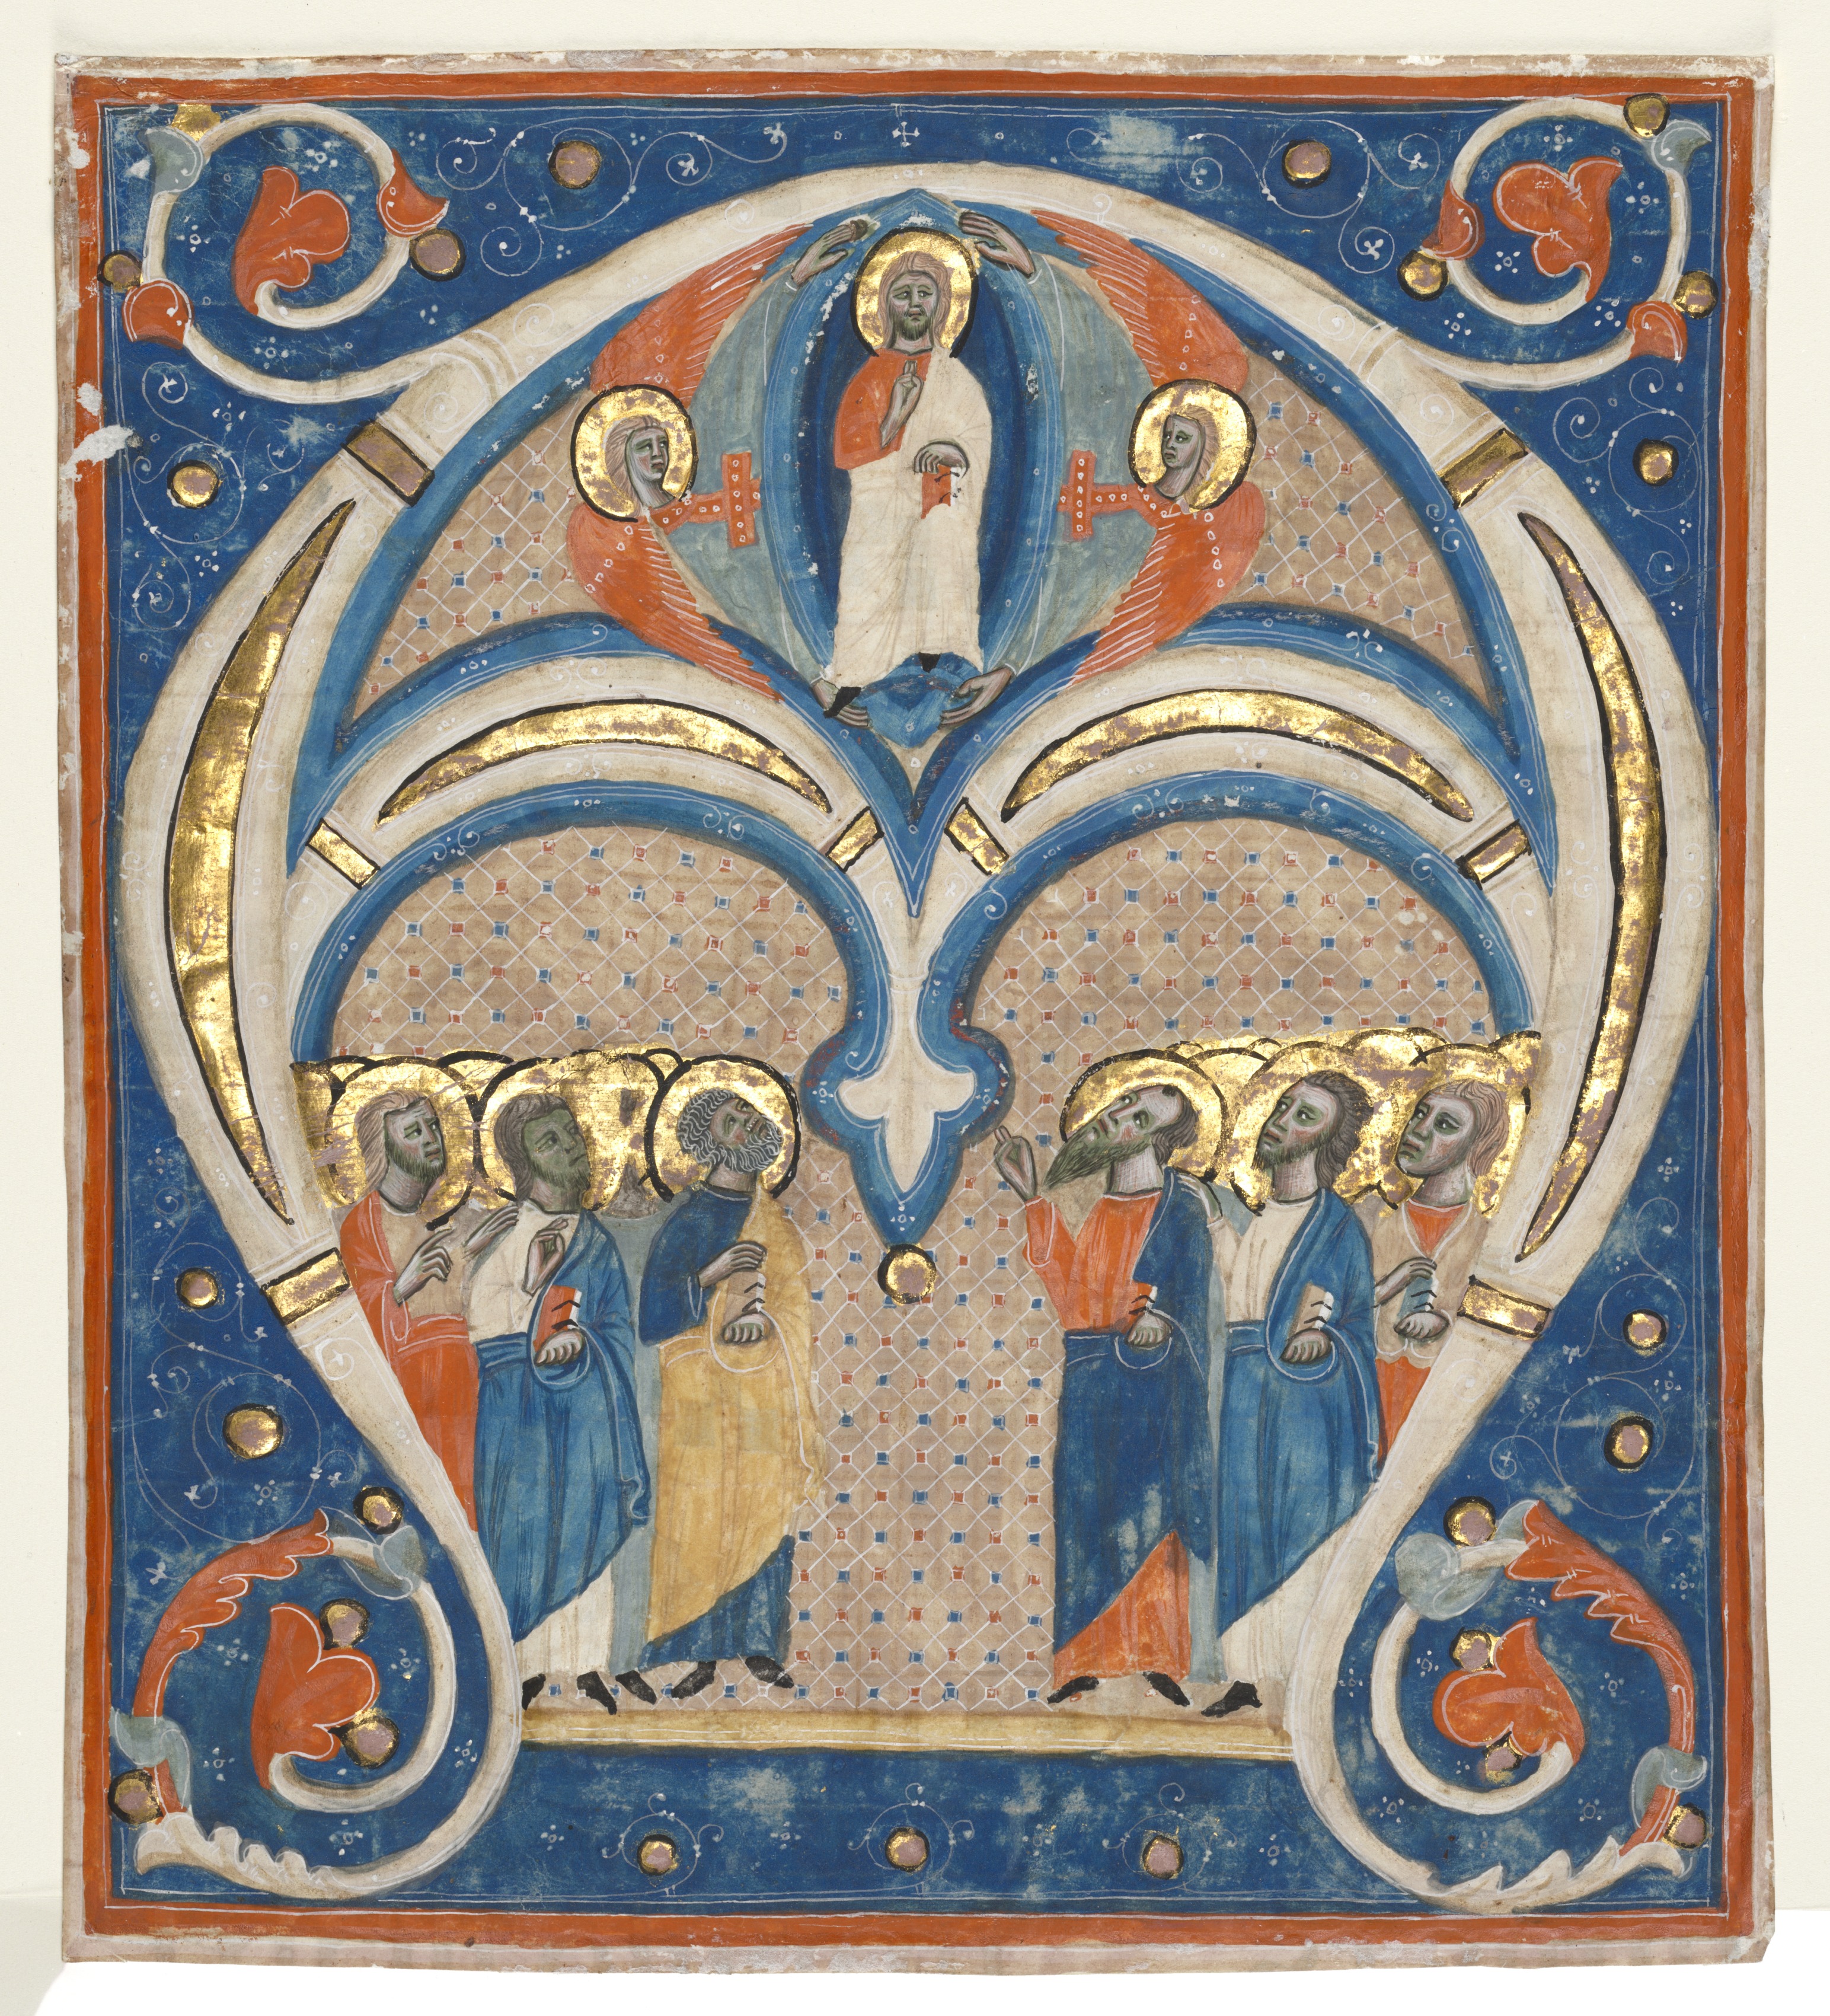 Historiated Initial (A) Excised from a Responsorial: Christ in Majesty with Saints